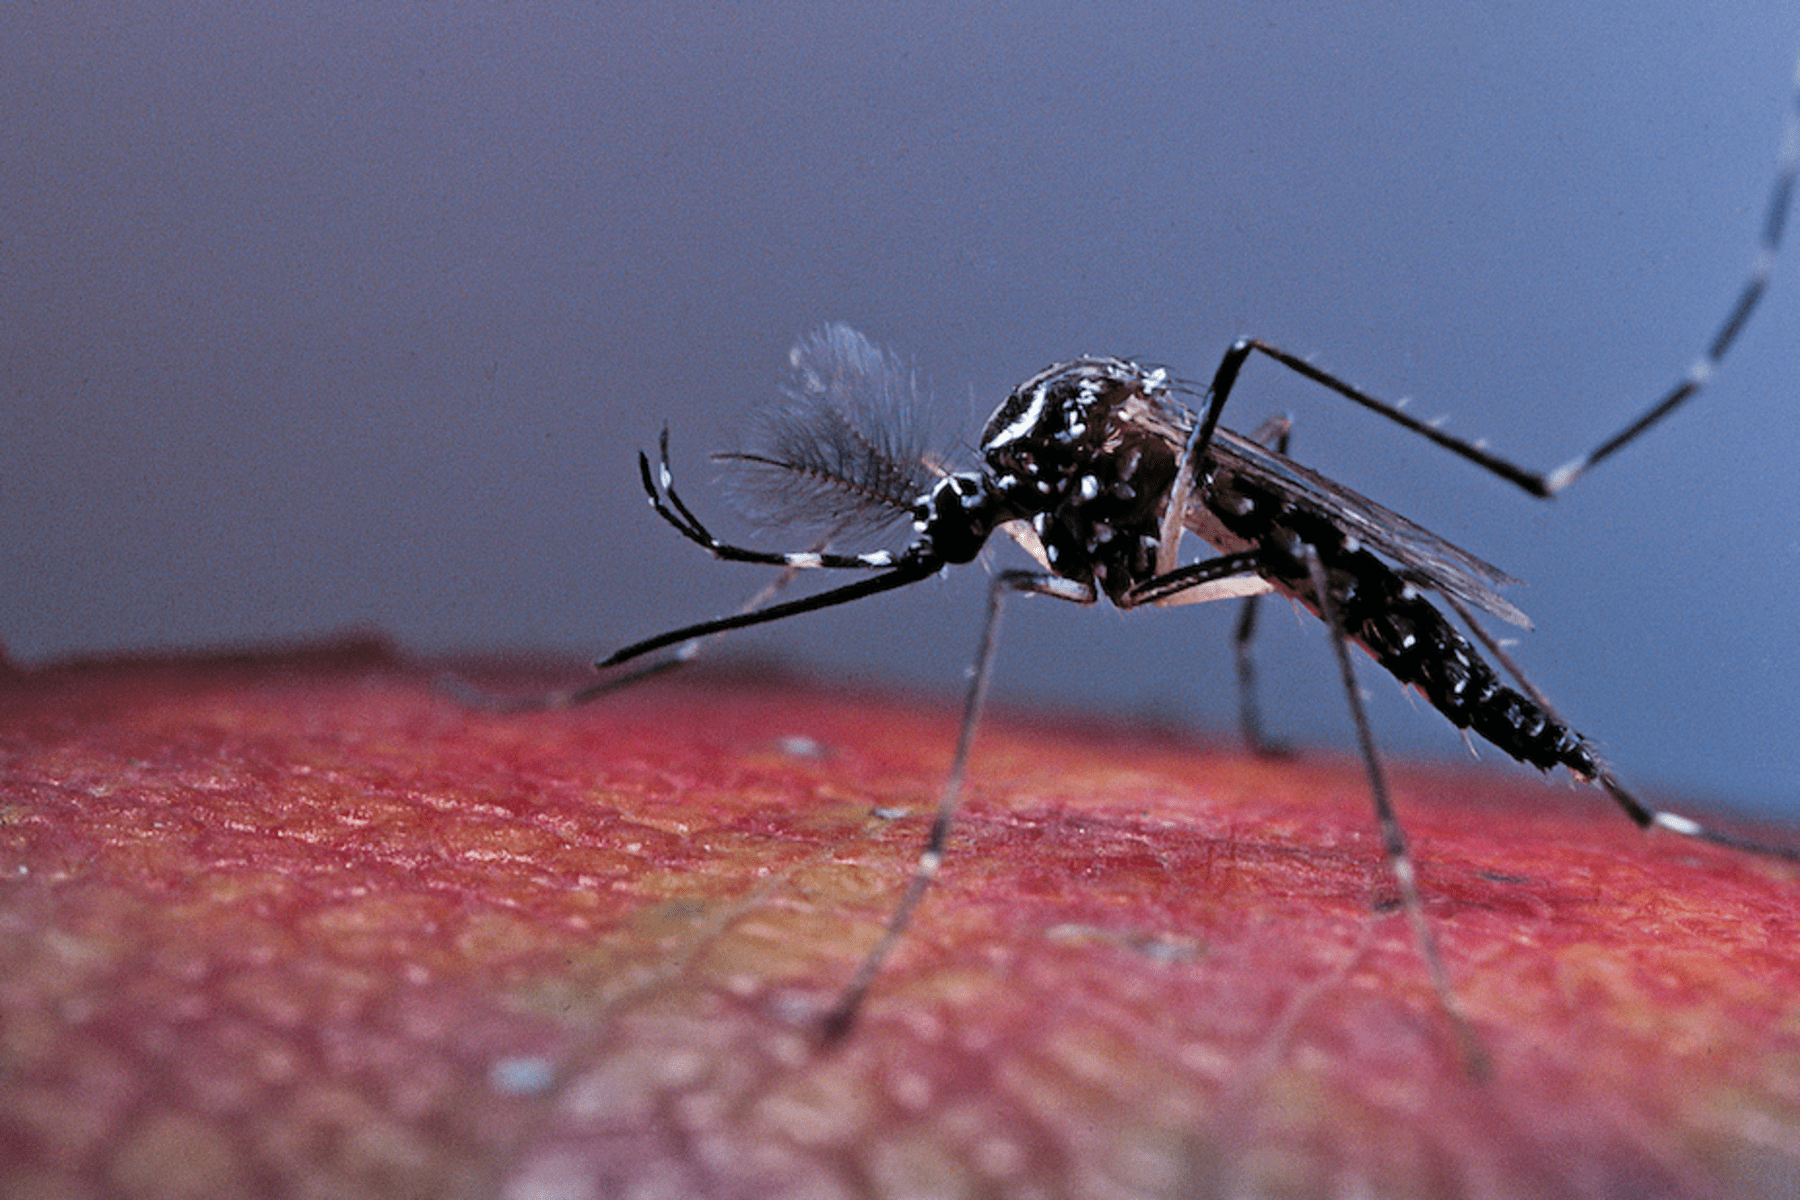 Dengue-blocking mosquitoes here to stay